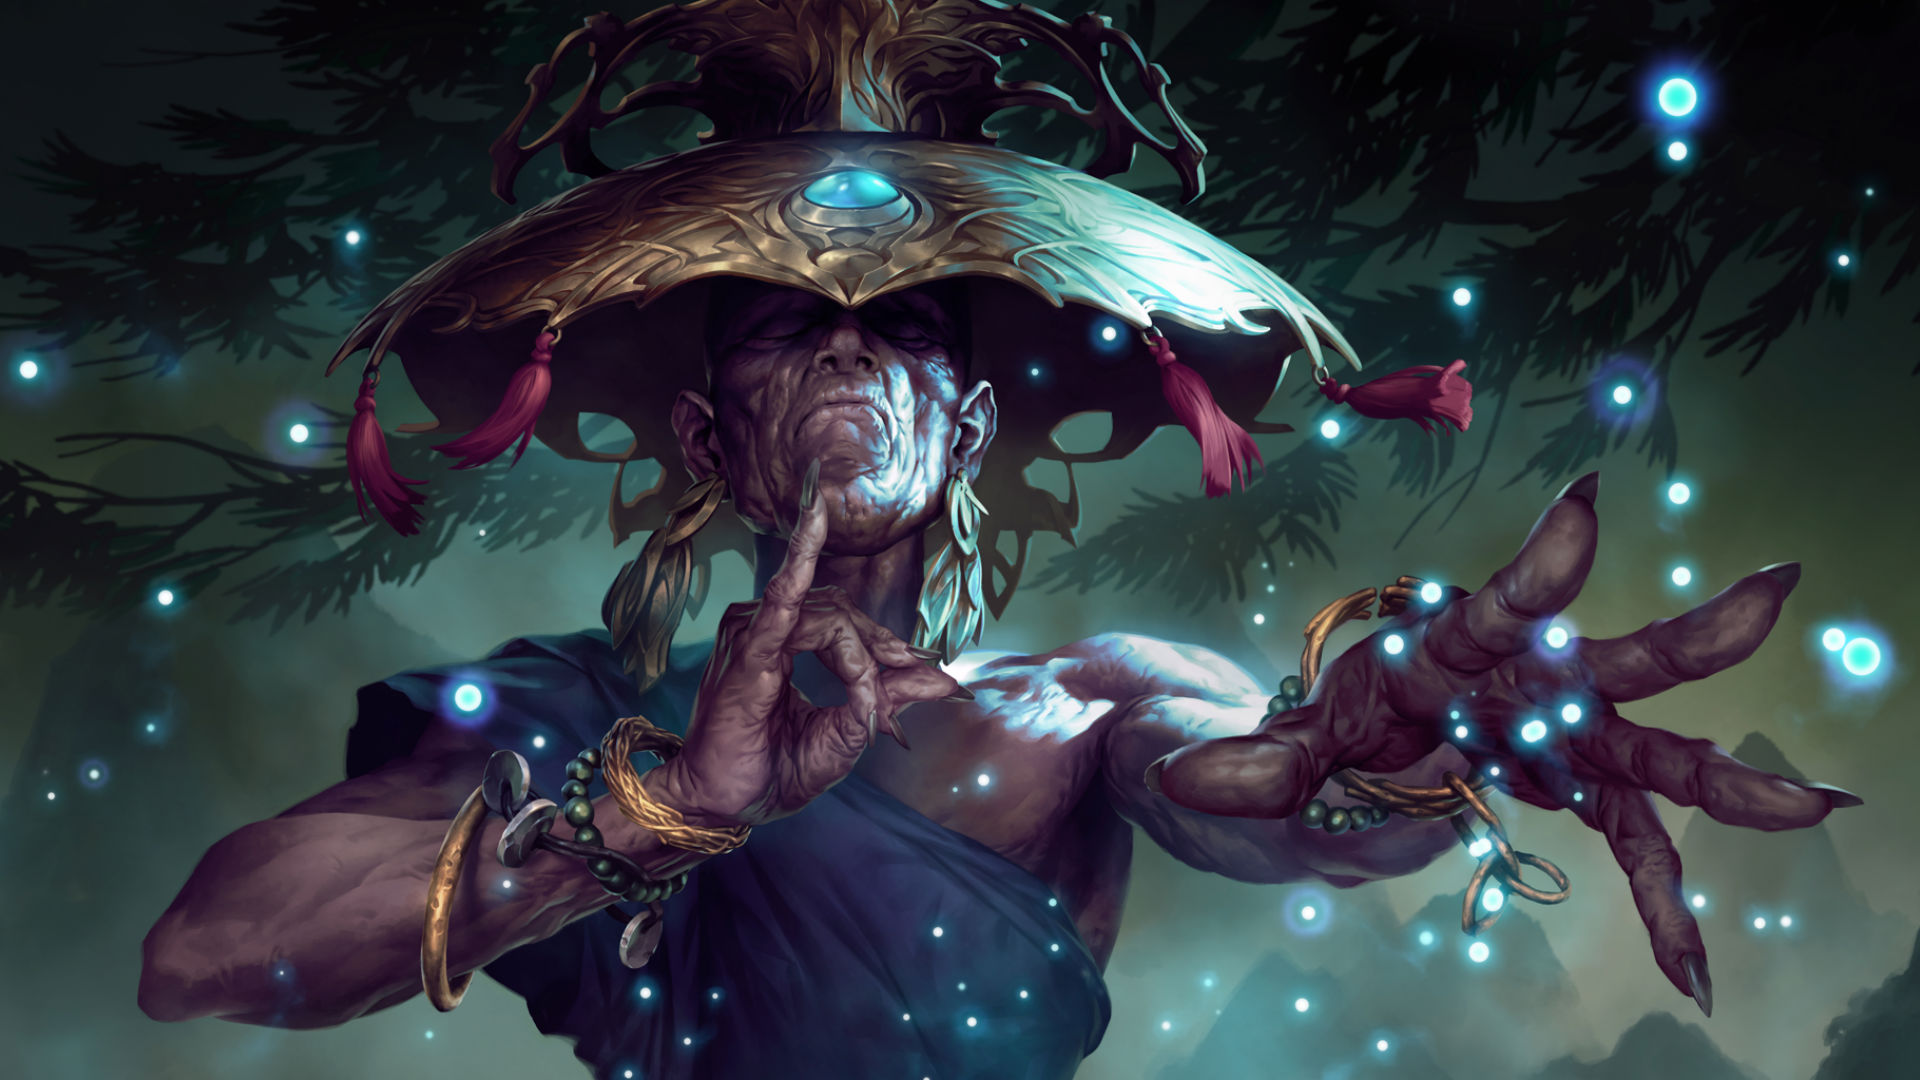 The art and inspirations behind Riot's Legends of Runeterra